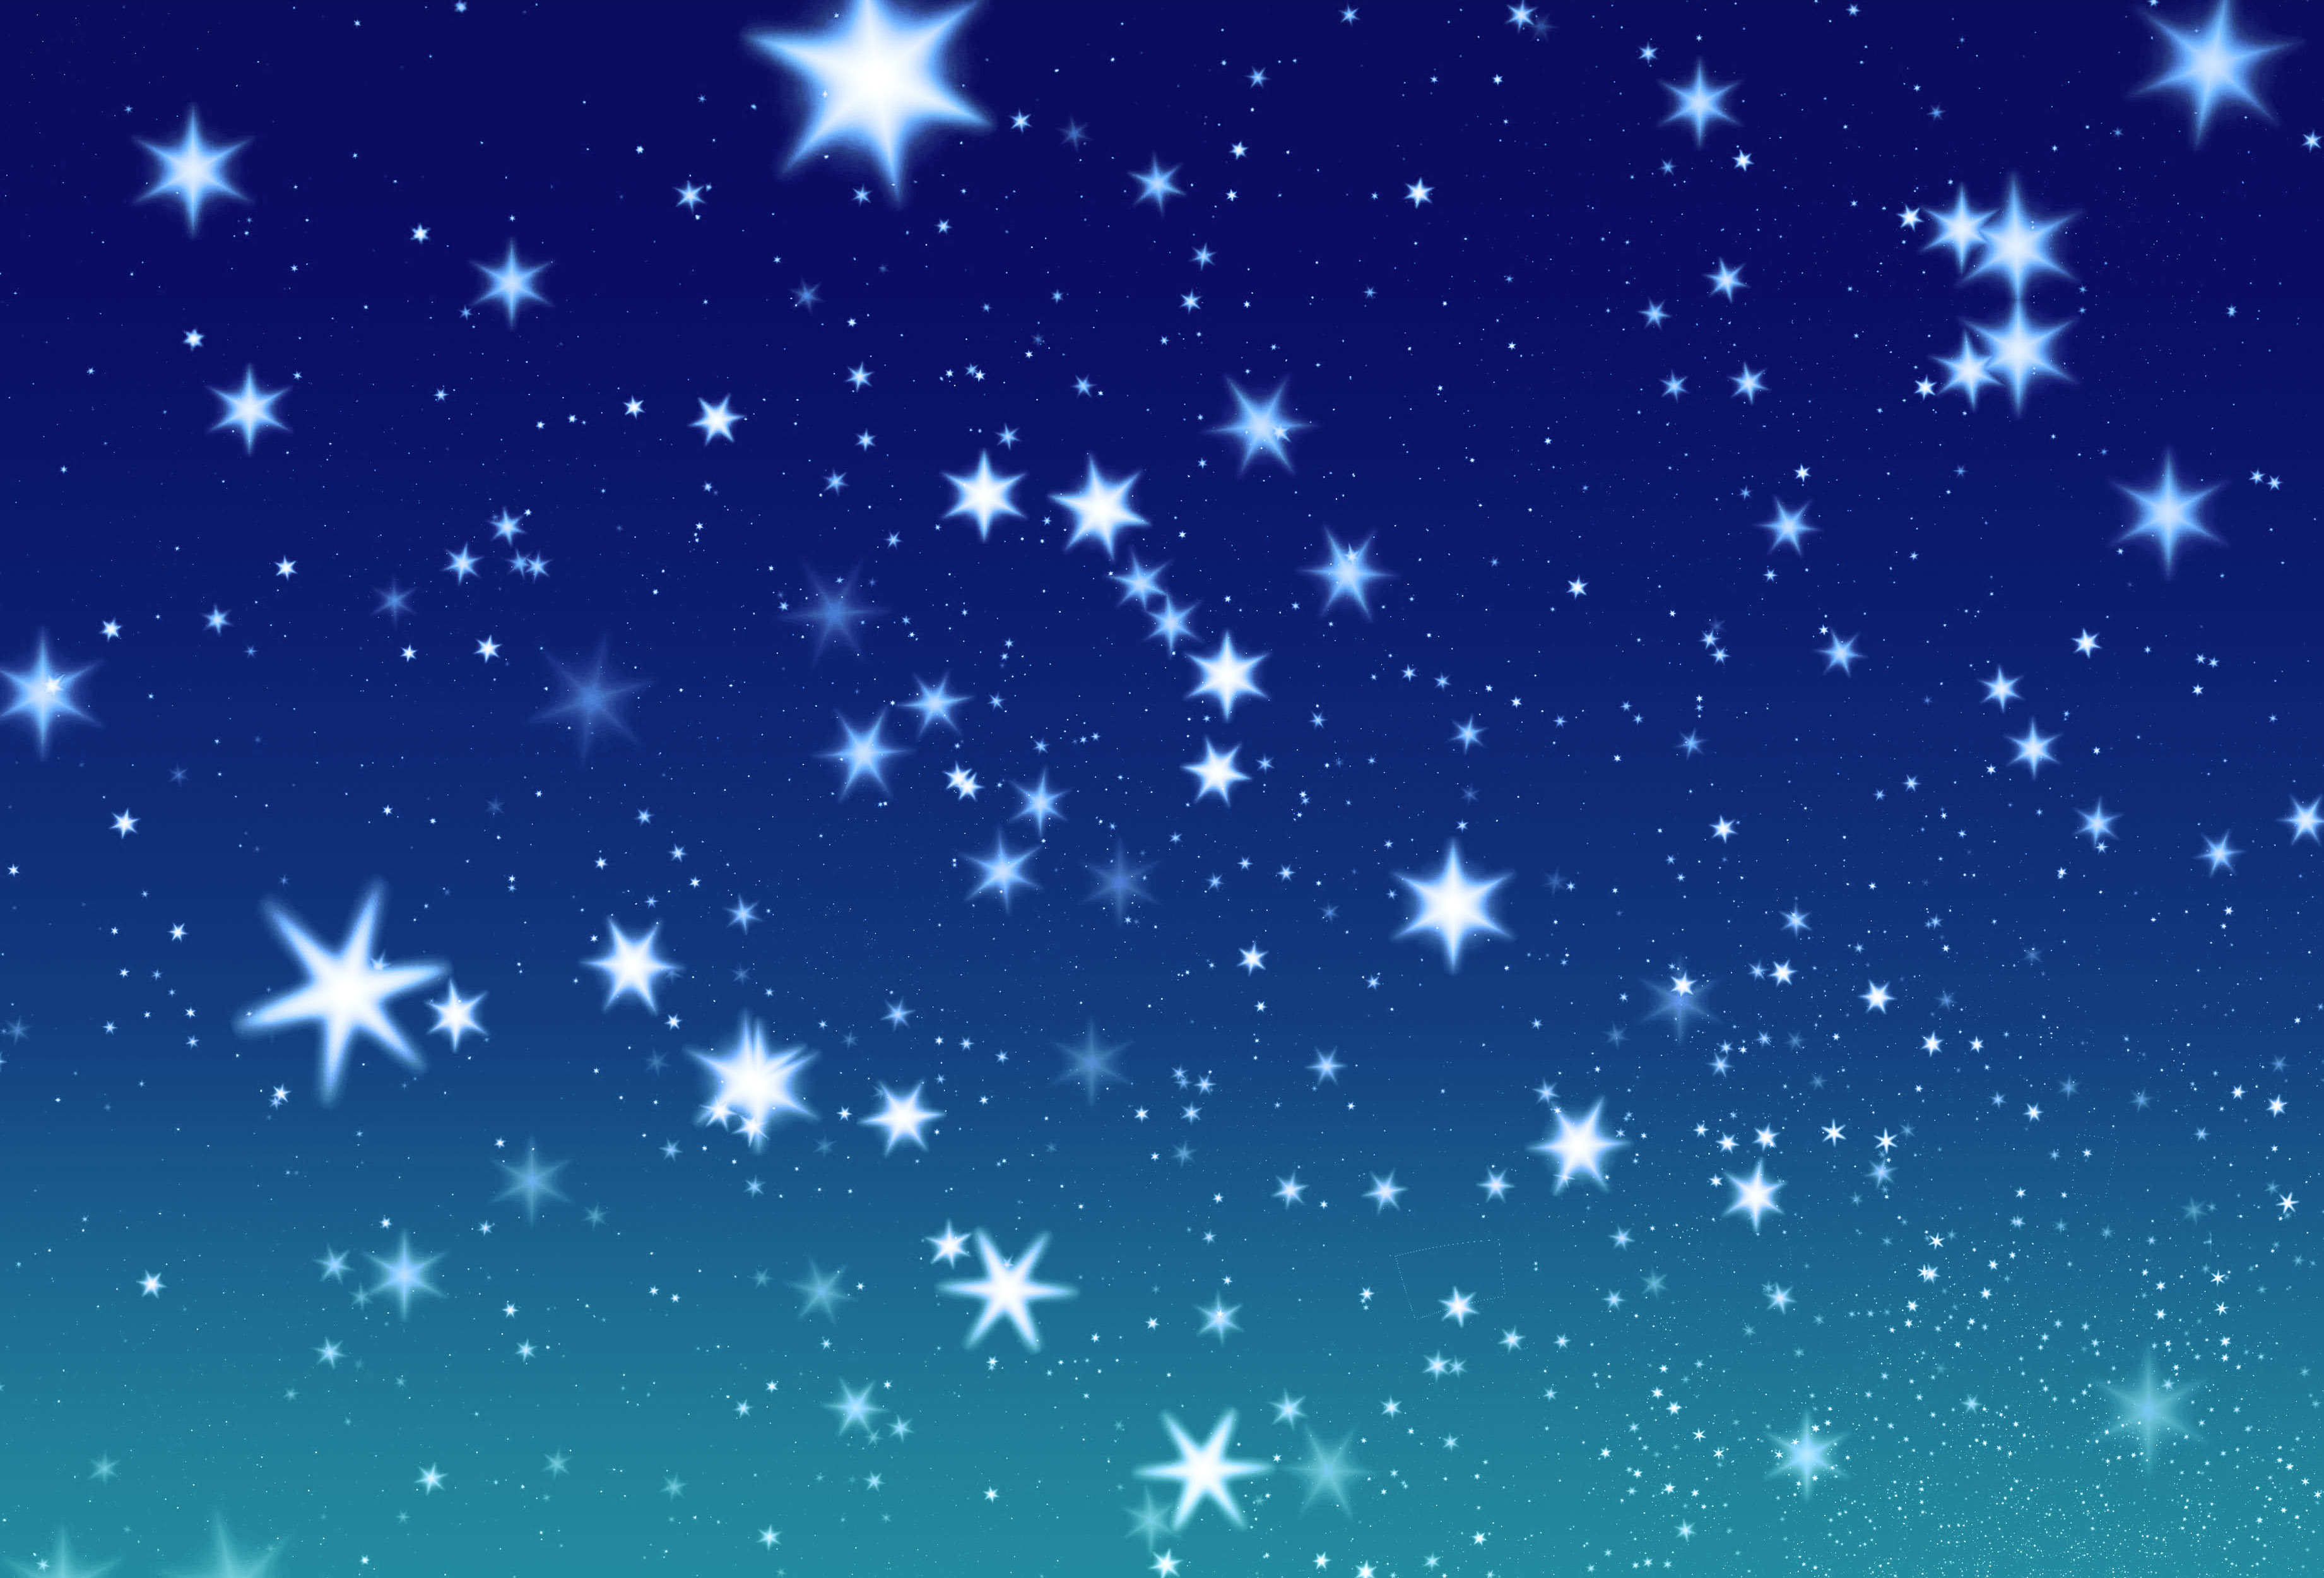 Stars In The Sky At Christmas Wallpaper